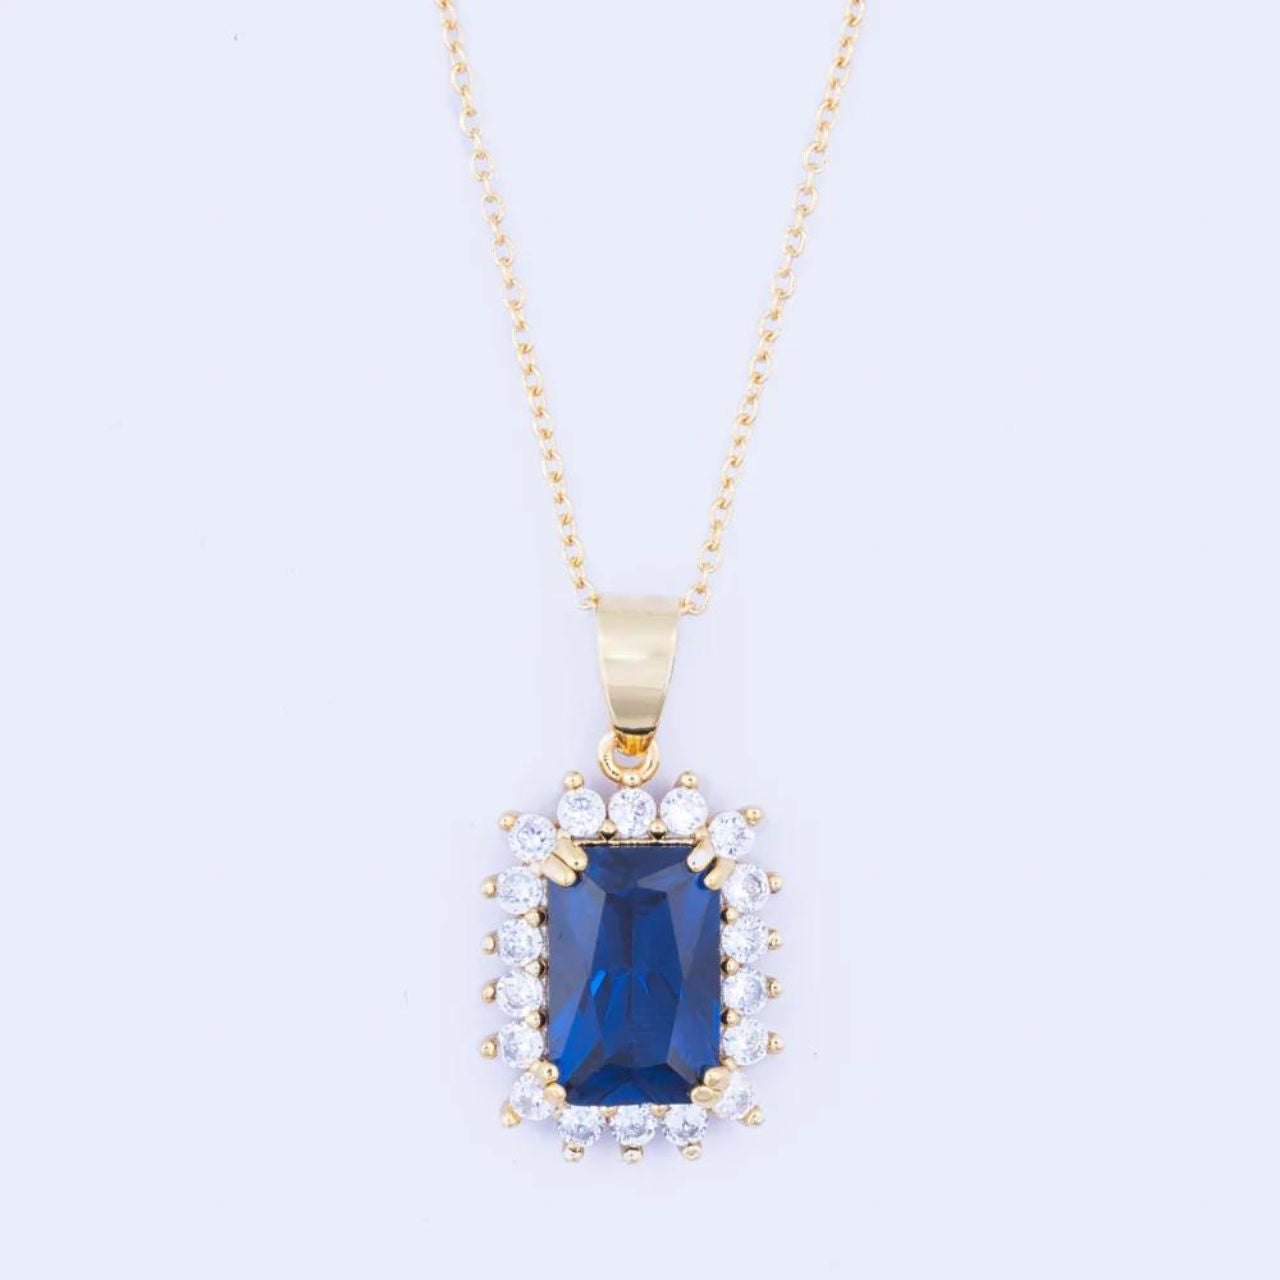 Knight & Day Classic Sapphire Pendant  Classic style pendant with beautiful sapphire CZ centre stone. Gold plating.  Length 42 + 5cm extension.